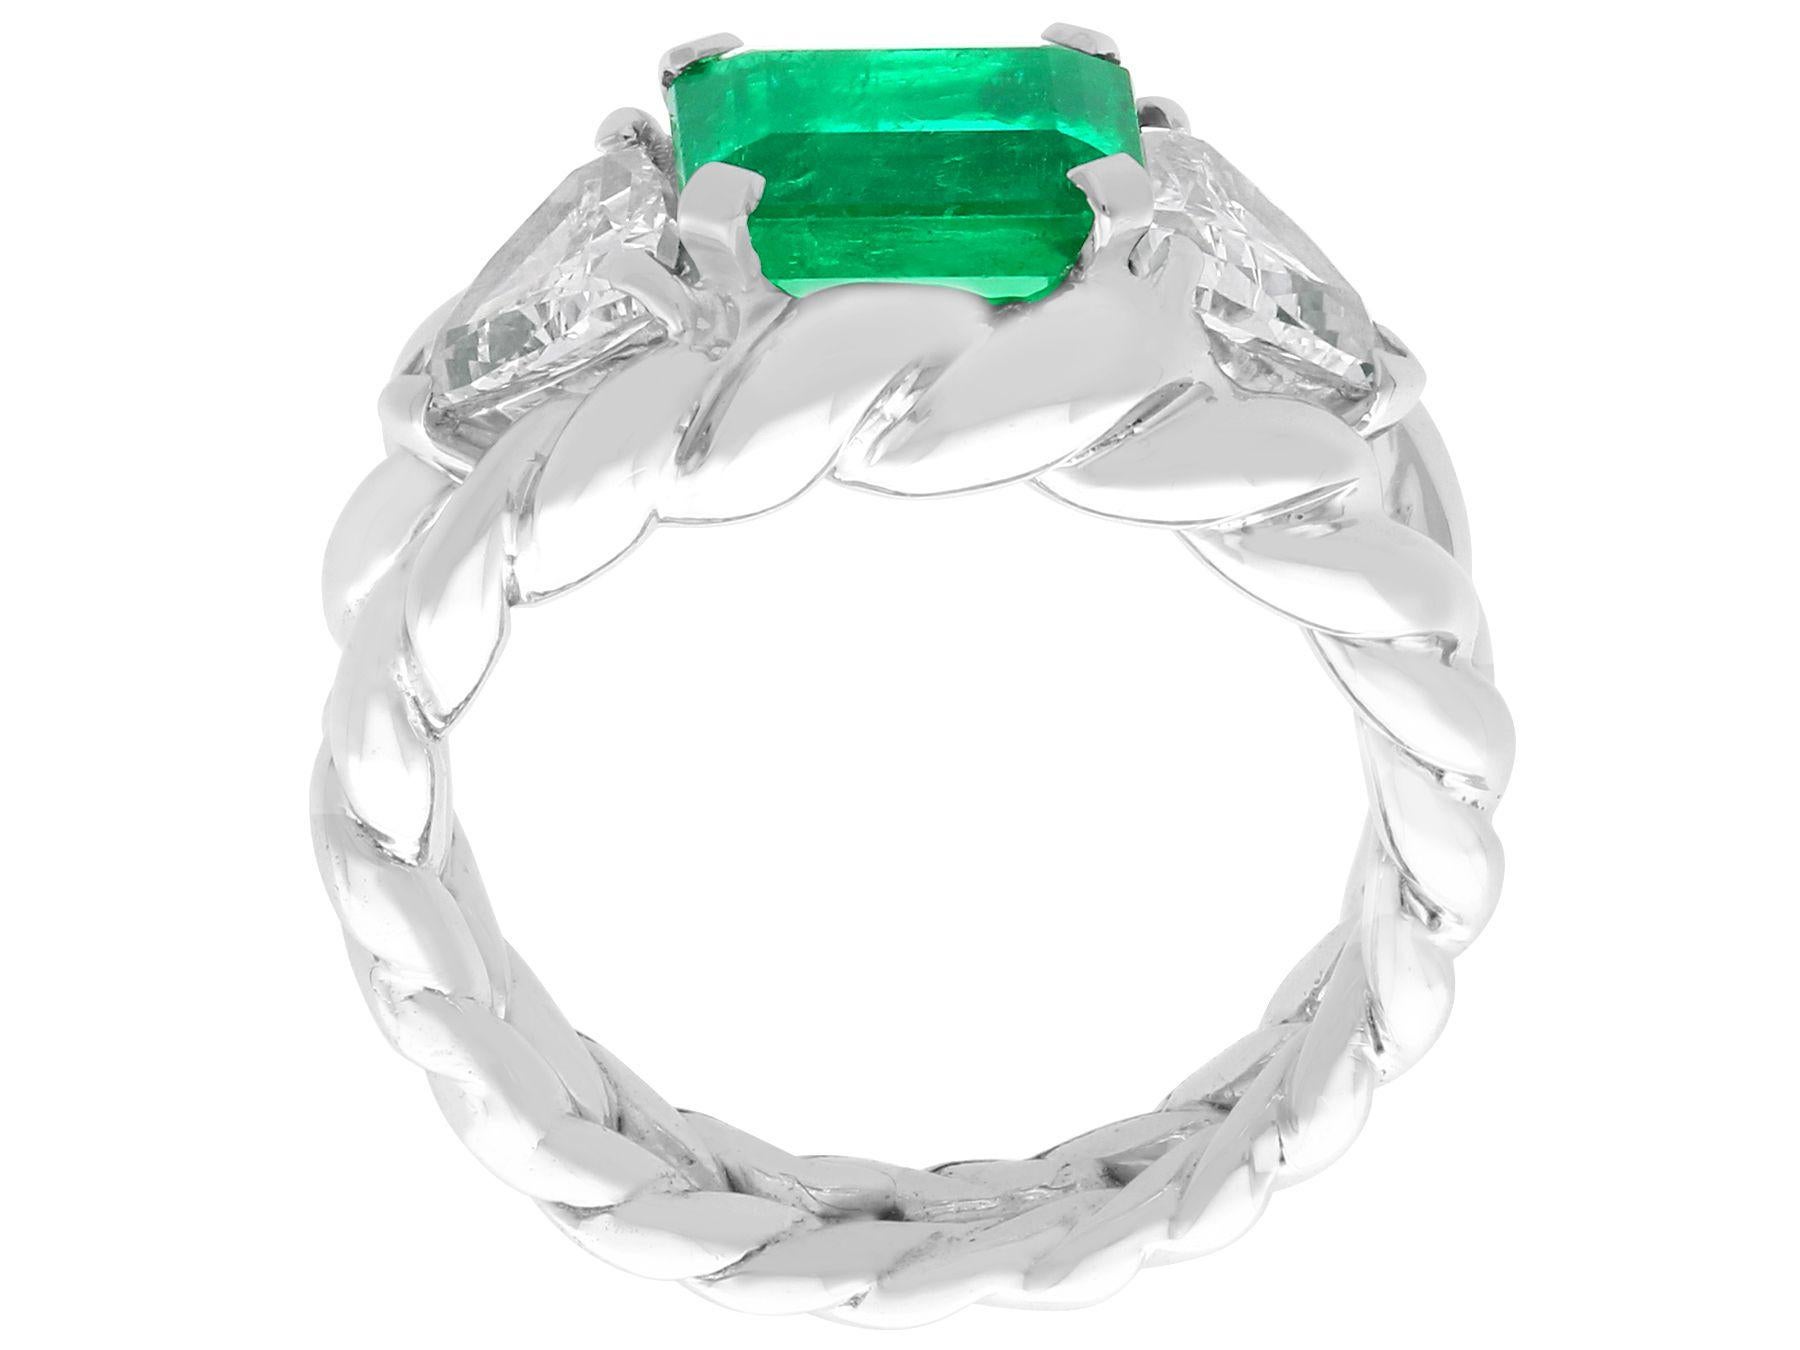 Vintage 1.64ct Emerald Cut Colombian Emerald and Diamond White Gold Ring For Sale 2